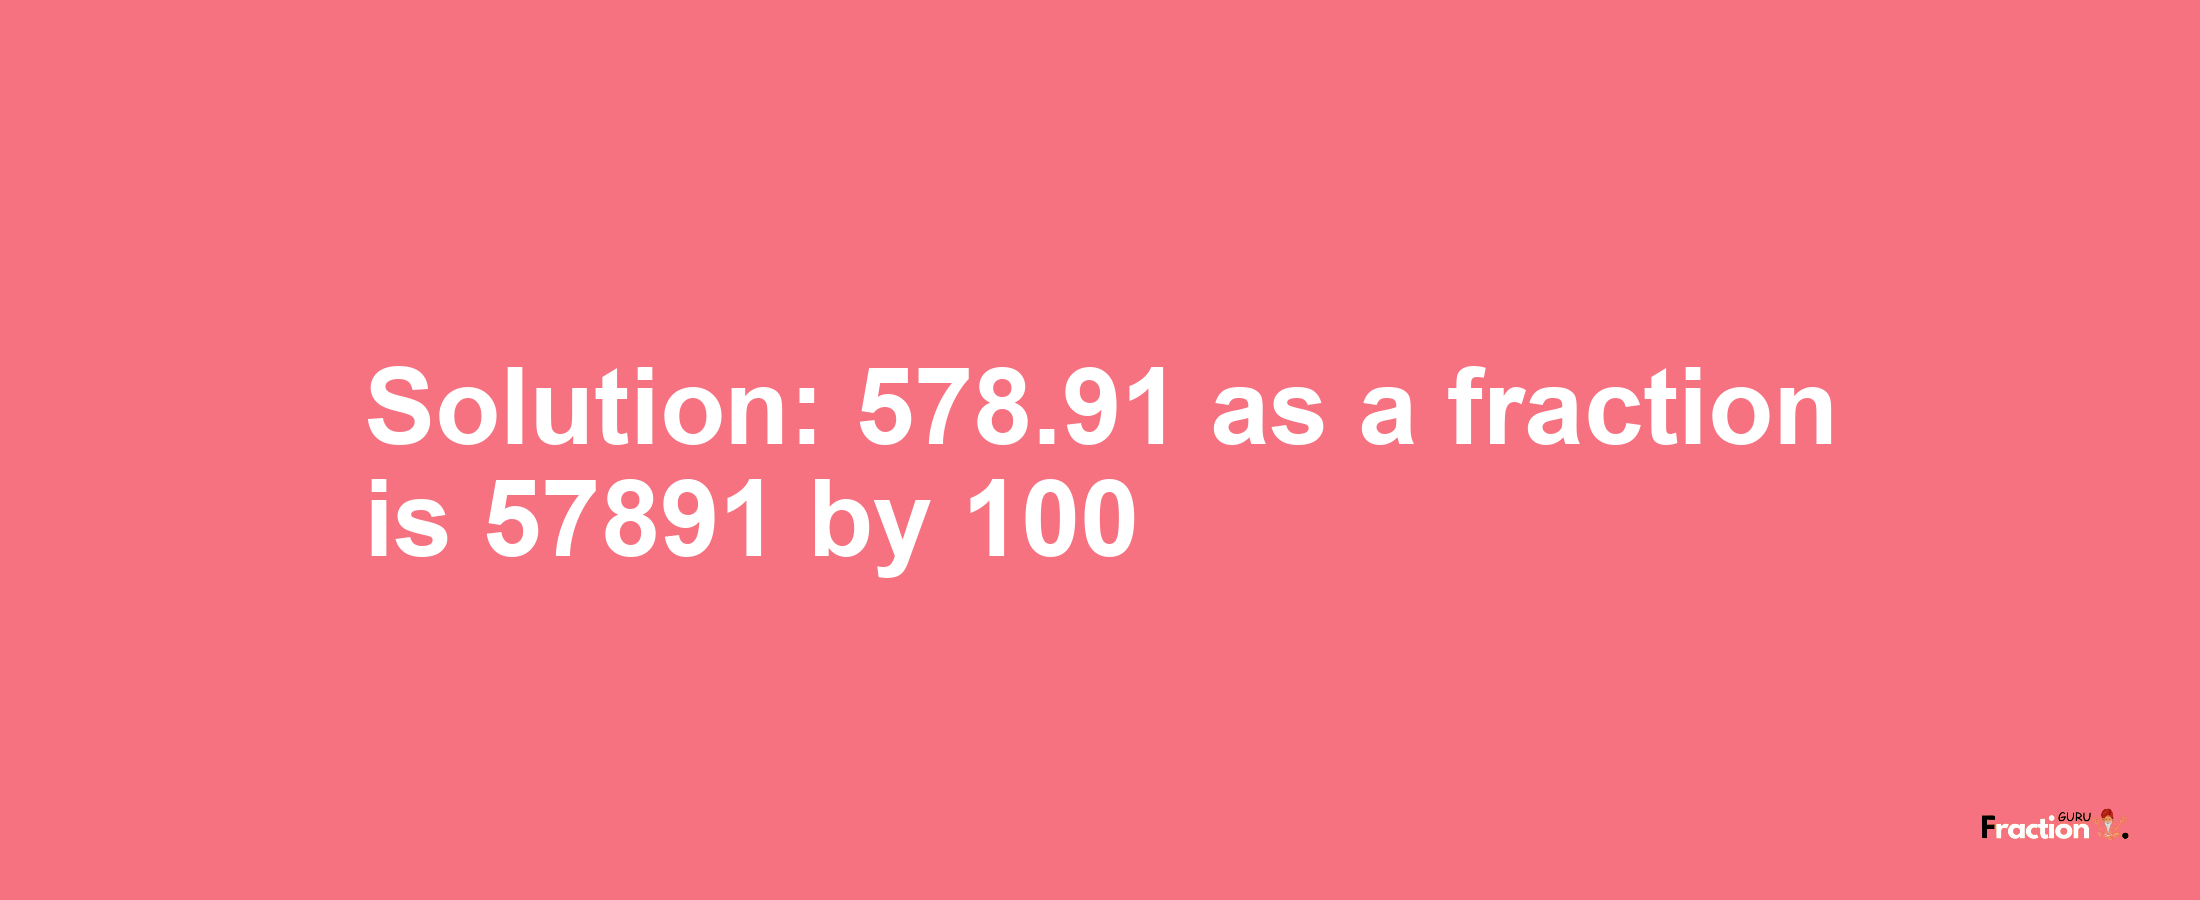 Solution:578.91 as a fraction is 57891/100